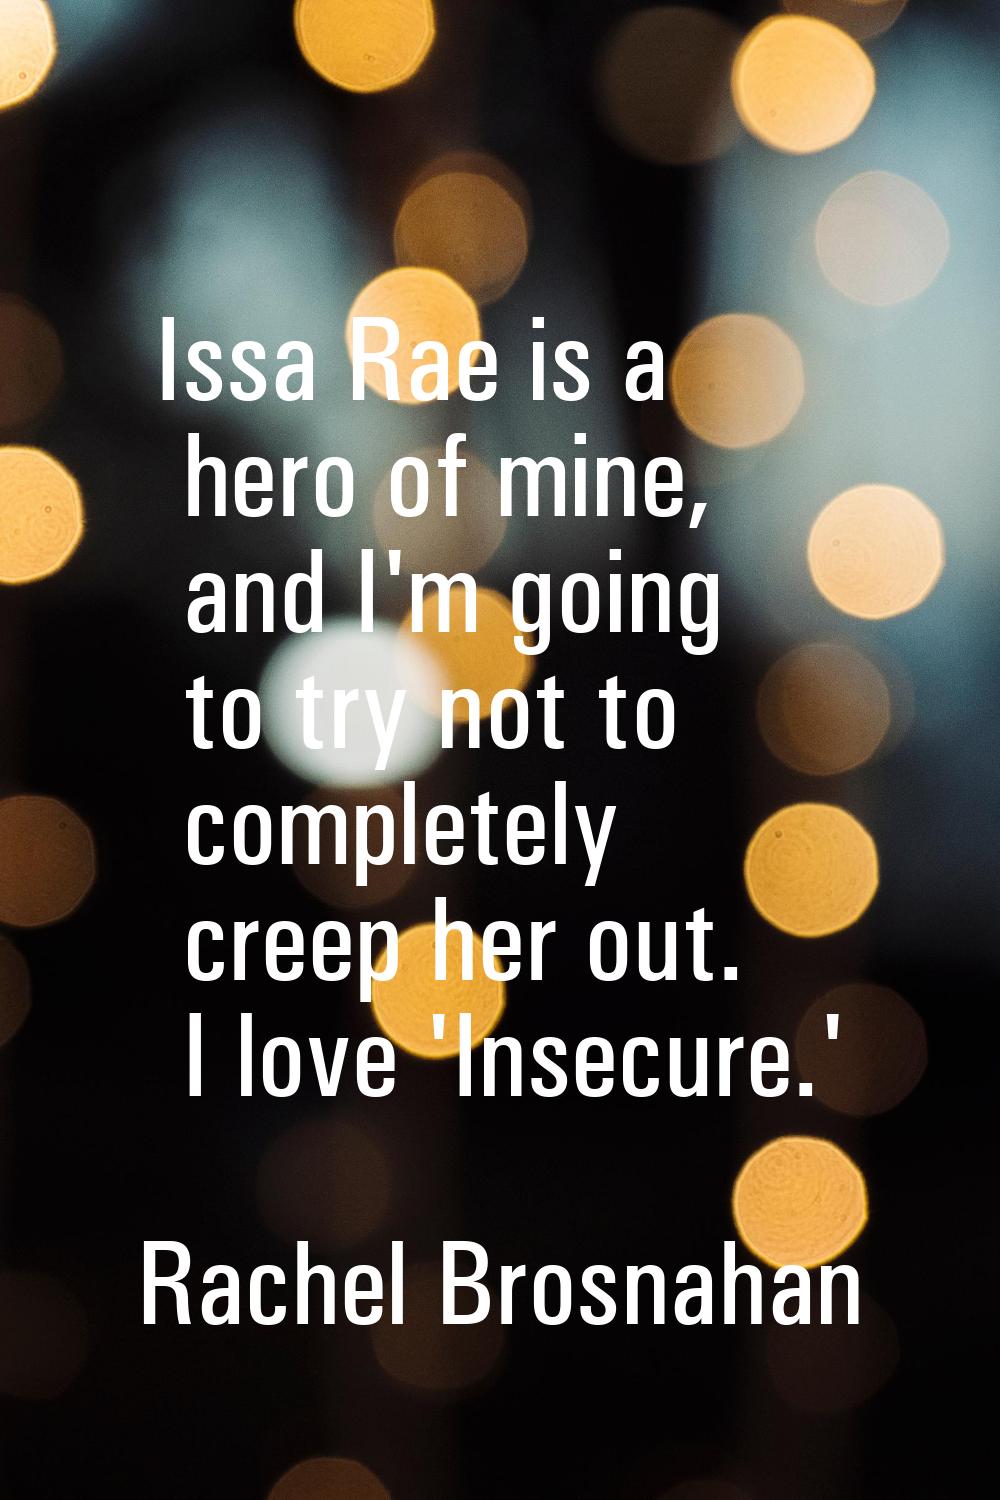 Issa Rae is a hero of mine, and I'm going to try not to completely creep her out. I love 'Insecure.